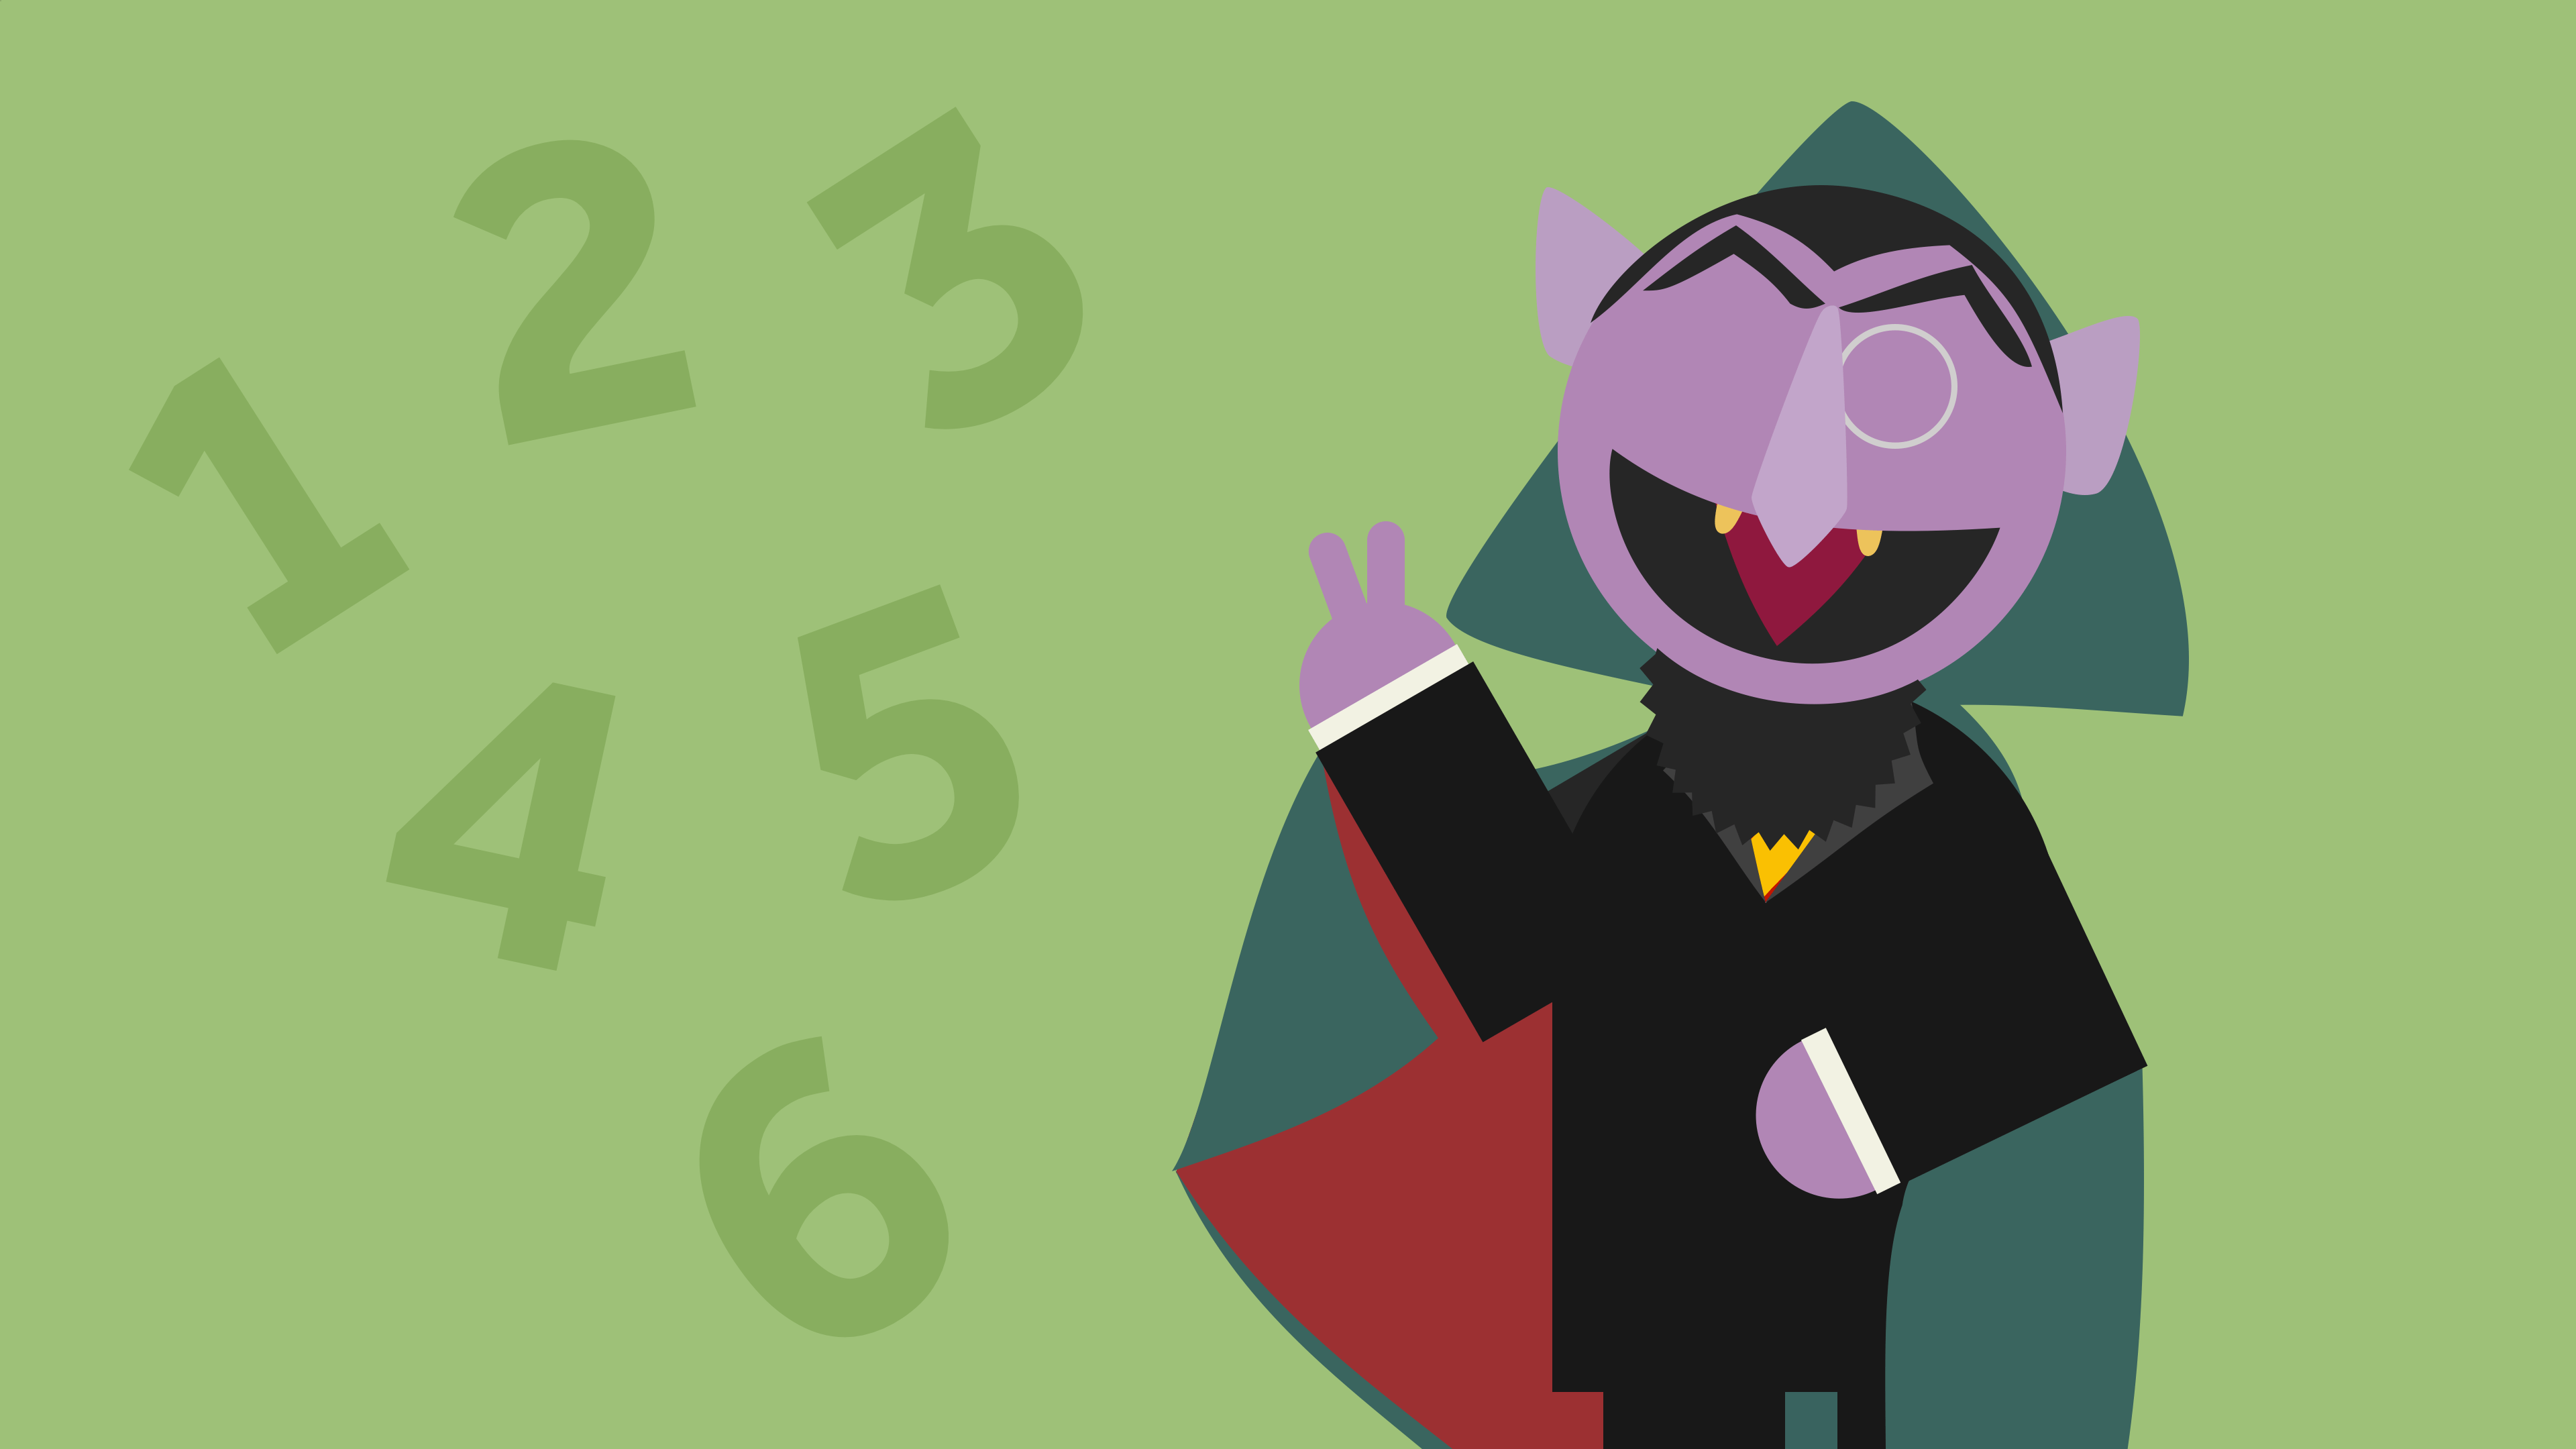 Count von Count counts things